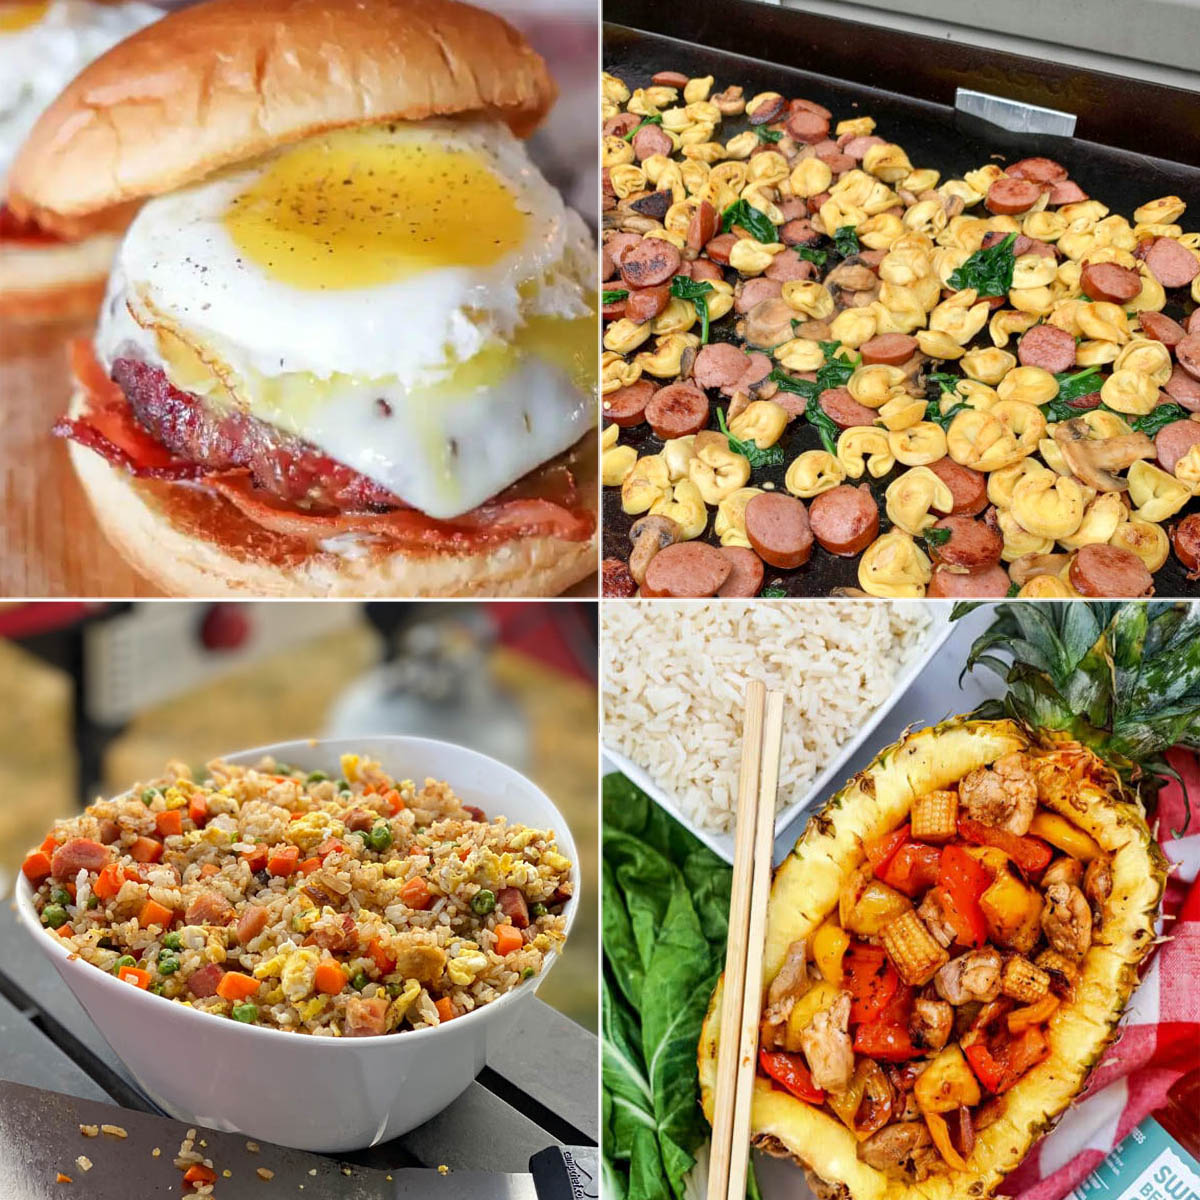 Blackstone Breakfast Recipes - From Michigan To The Table